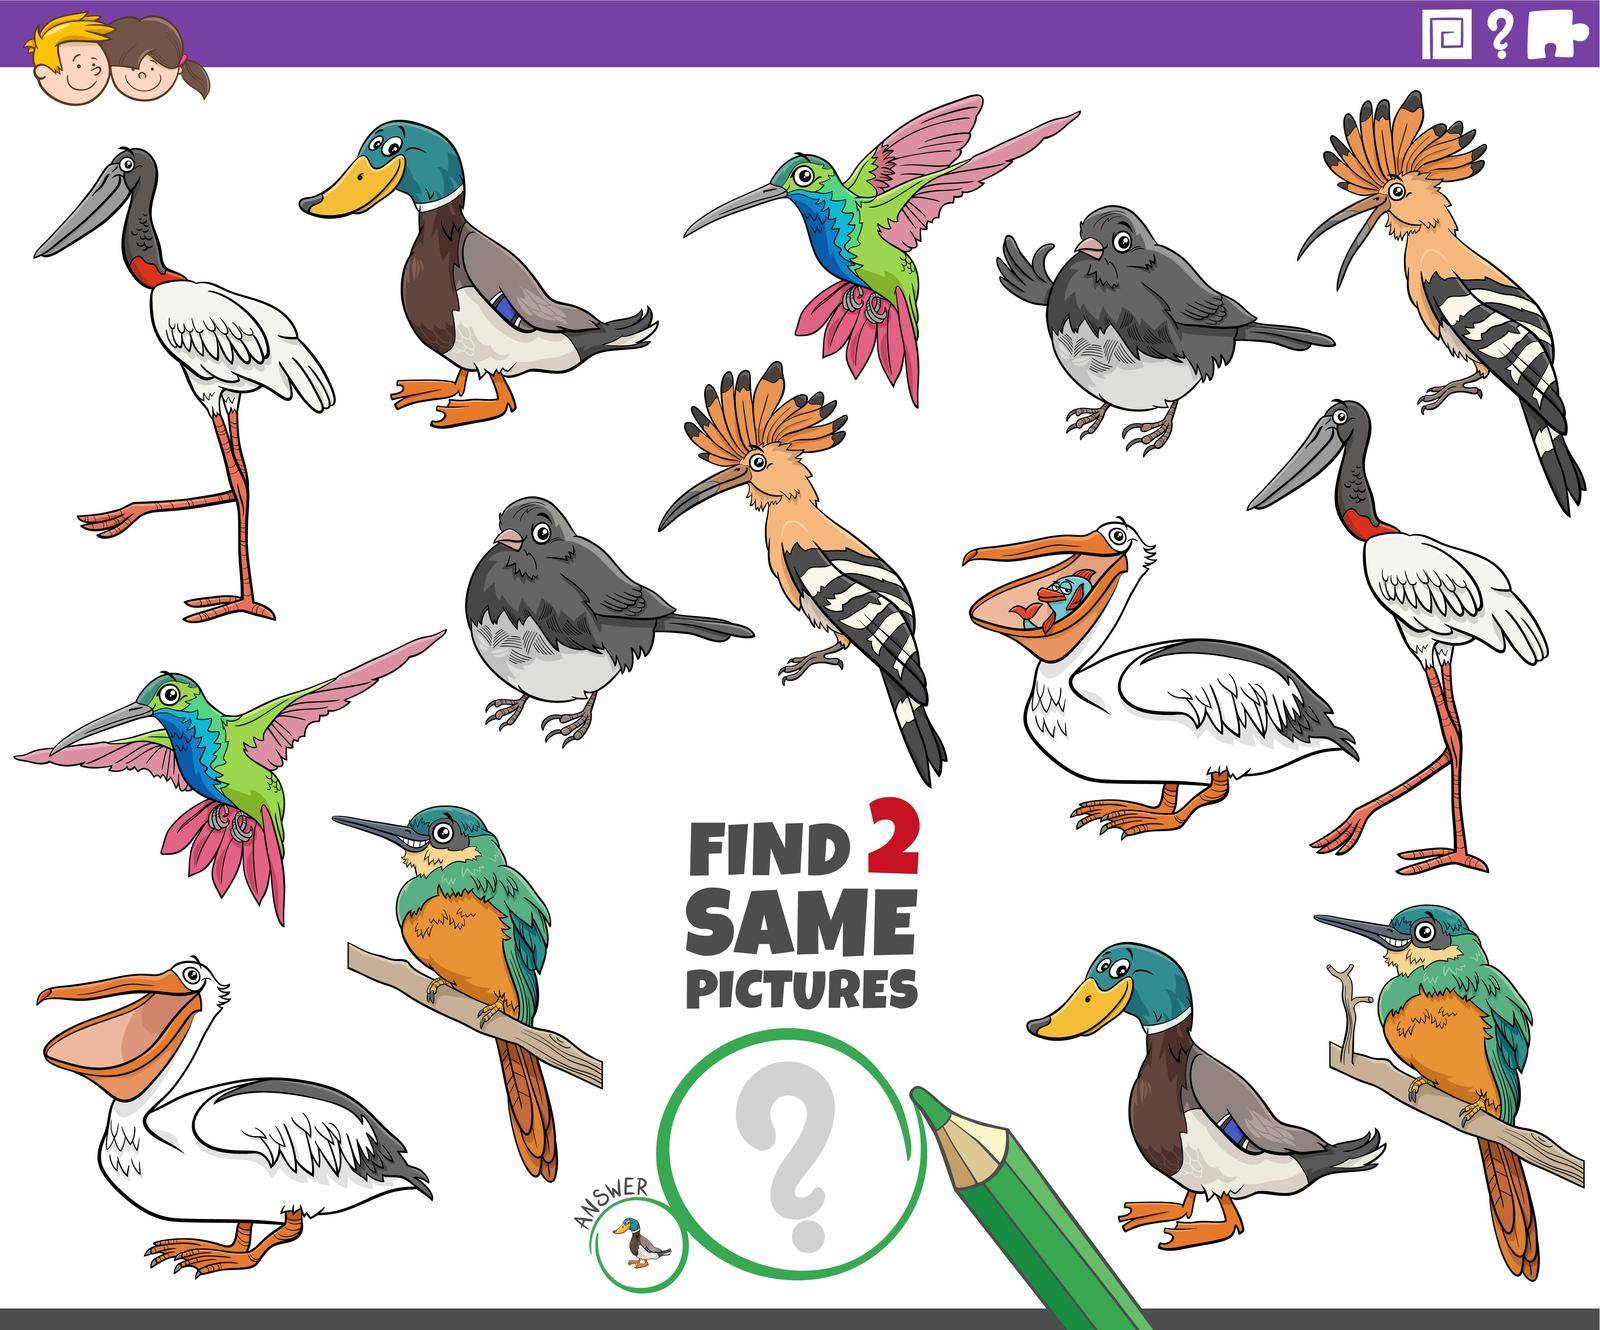 Cartoon illustration of finding two same pictures educational game with comic birds animal characters